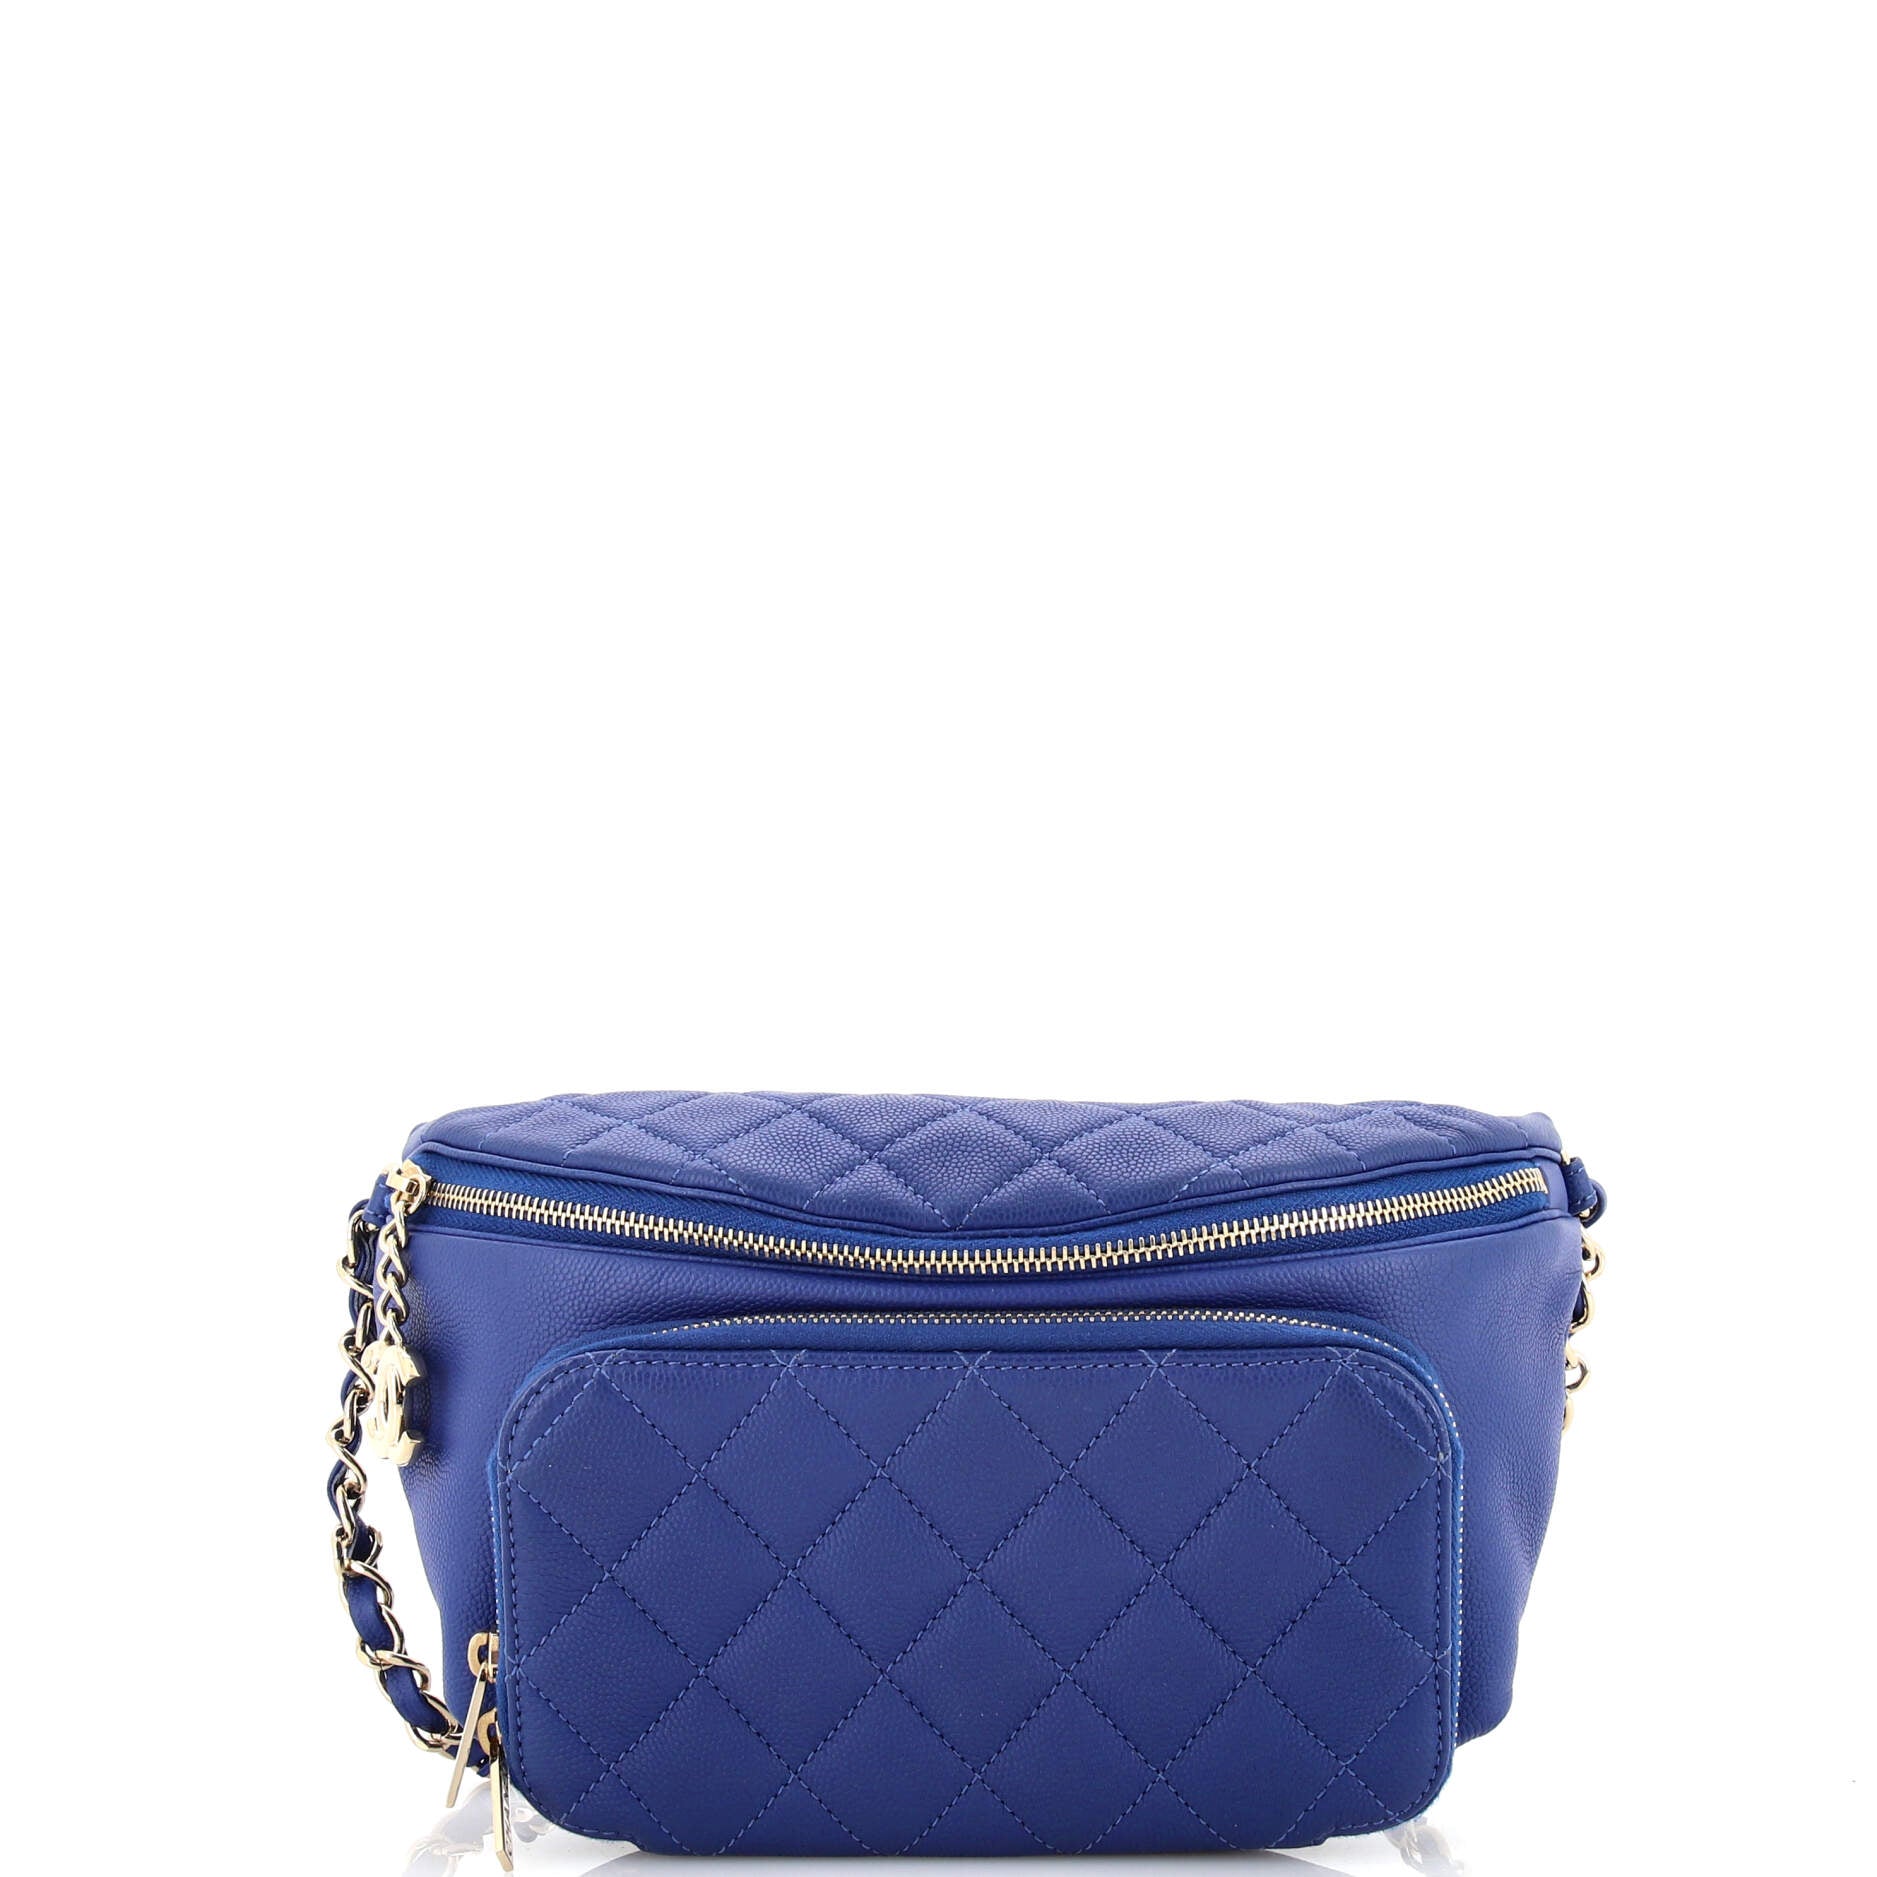 CHANEL Caviar Quilted Business Affinity Waist Belt Bag Black | FASHIONPHILE